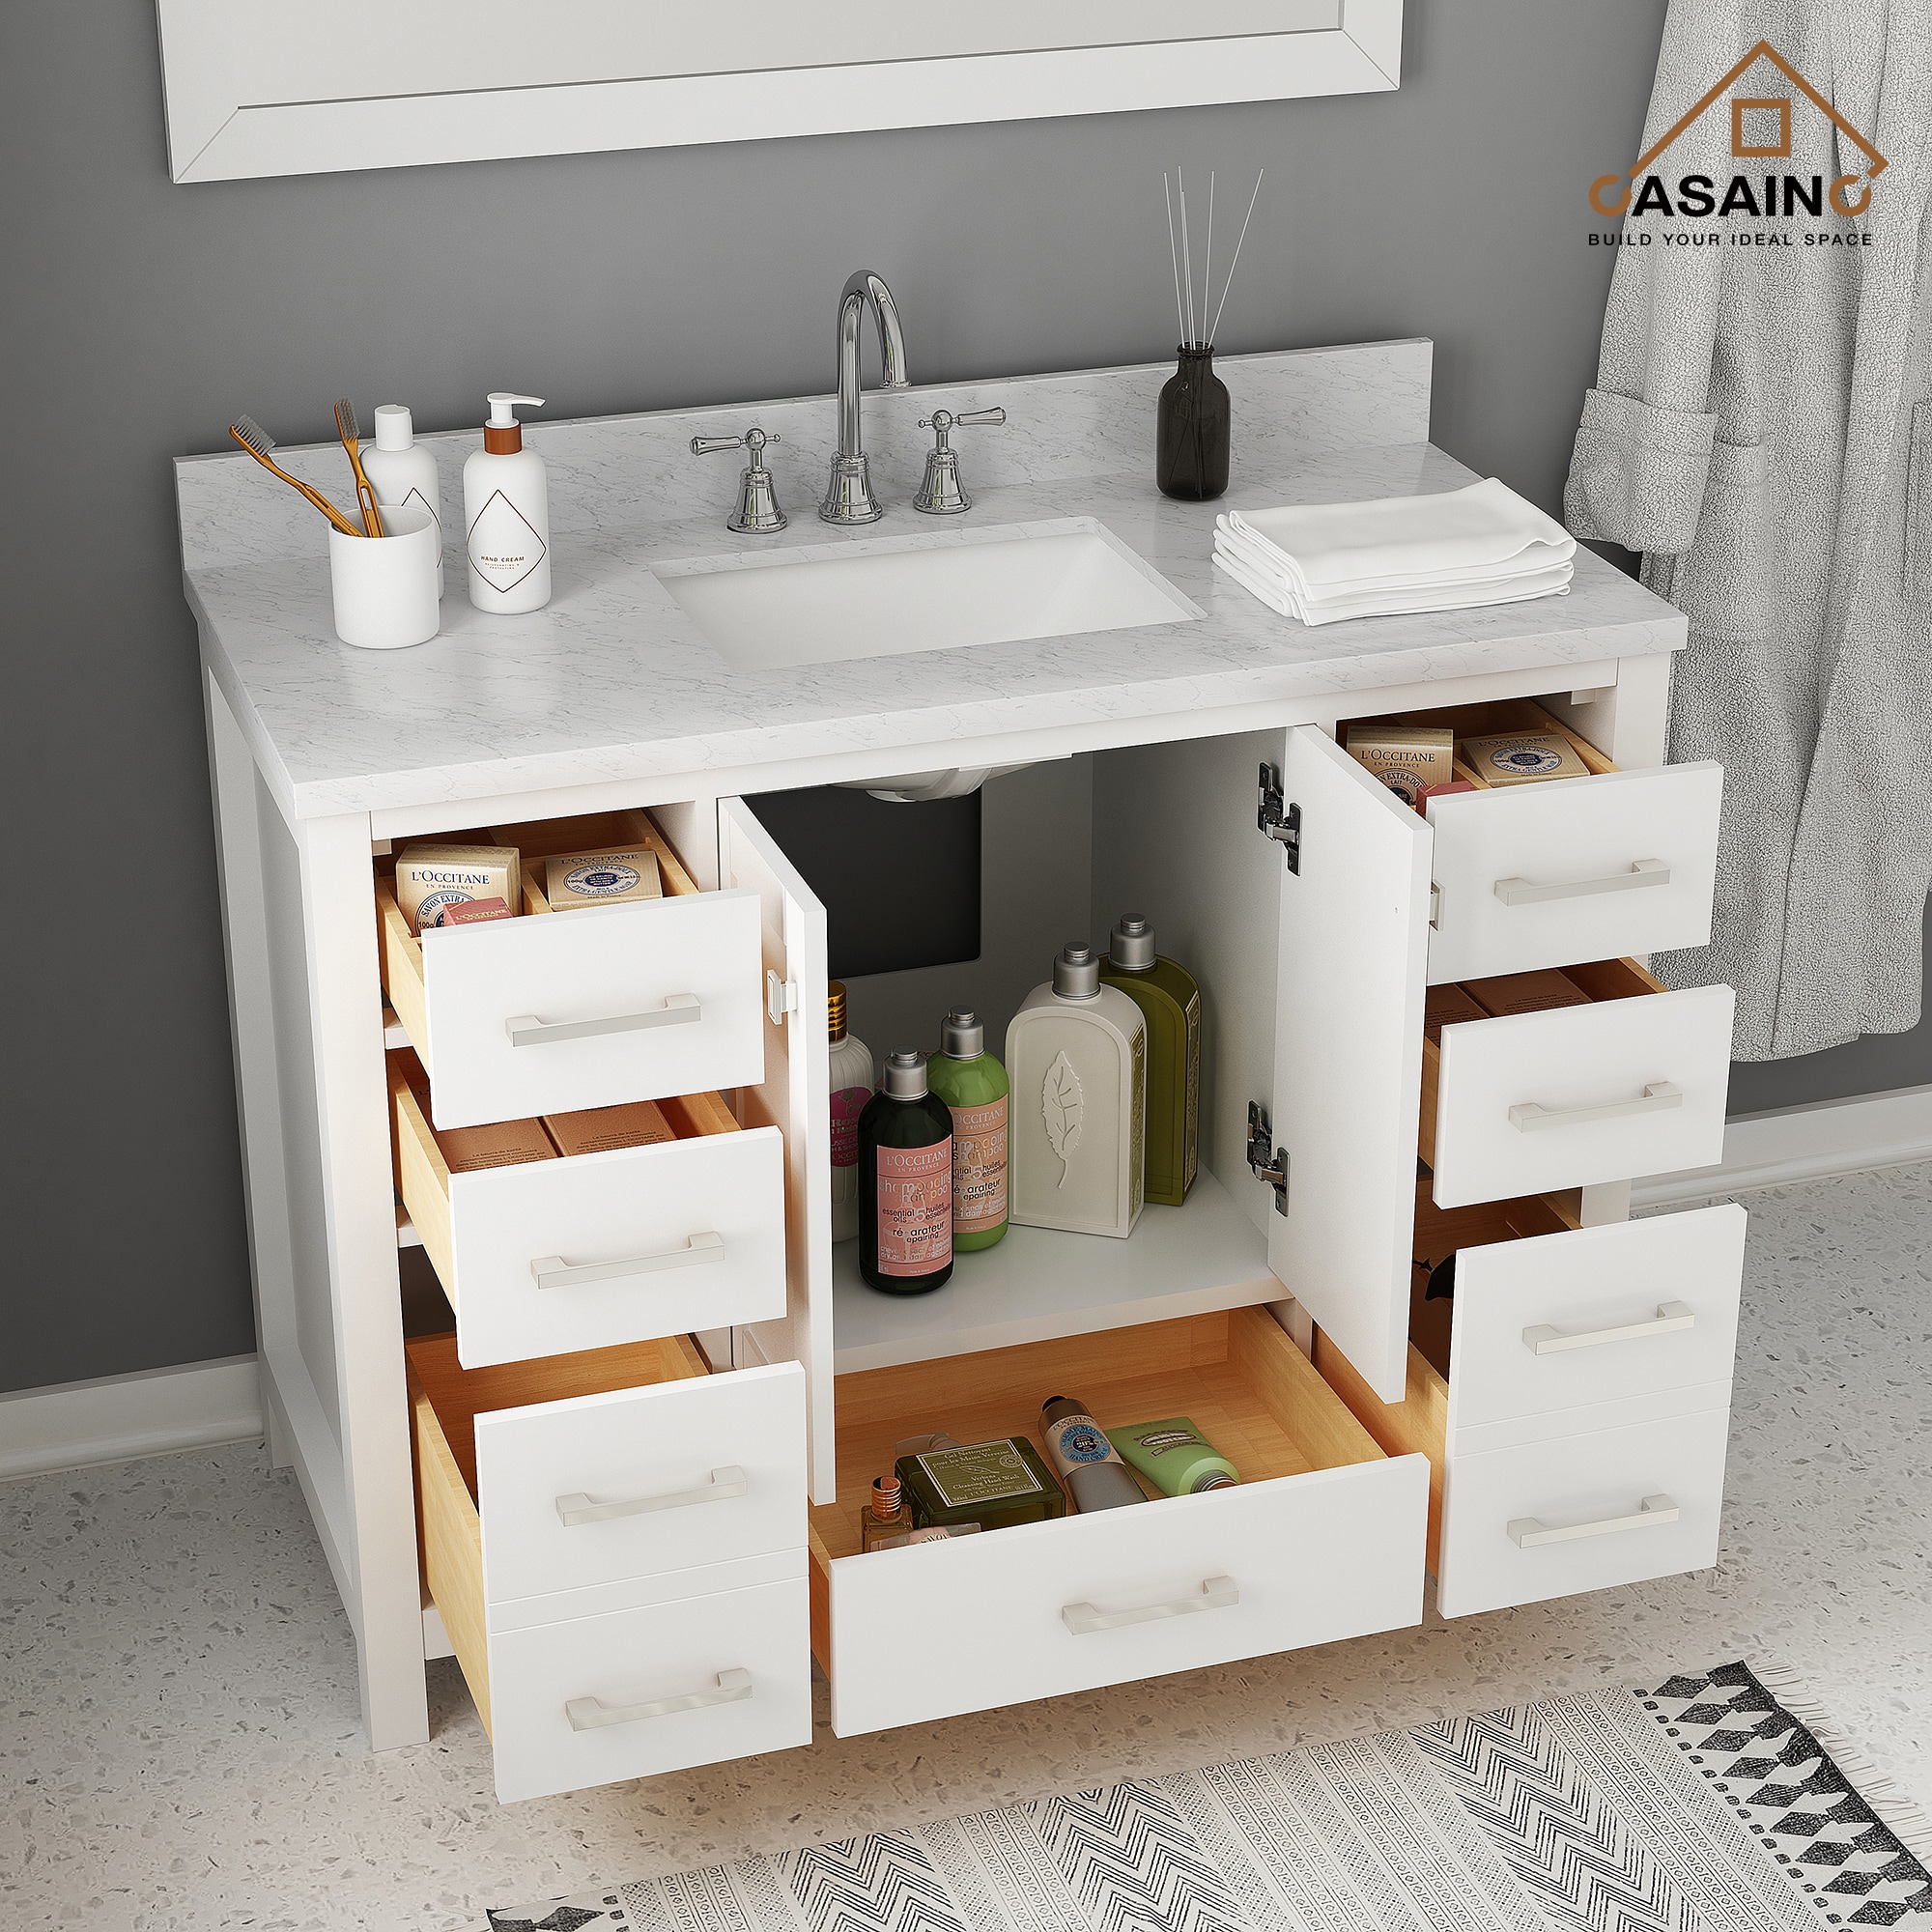 Casainc 48 In White Undermount Single Sink Bathroom Vanity With White Marble Top In The Bathroom 5596